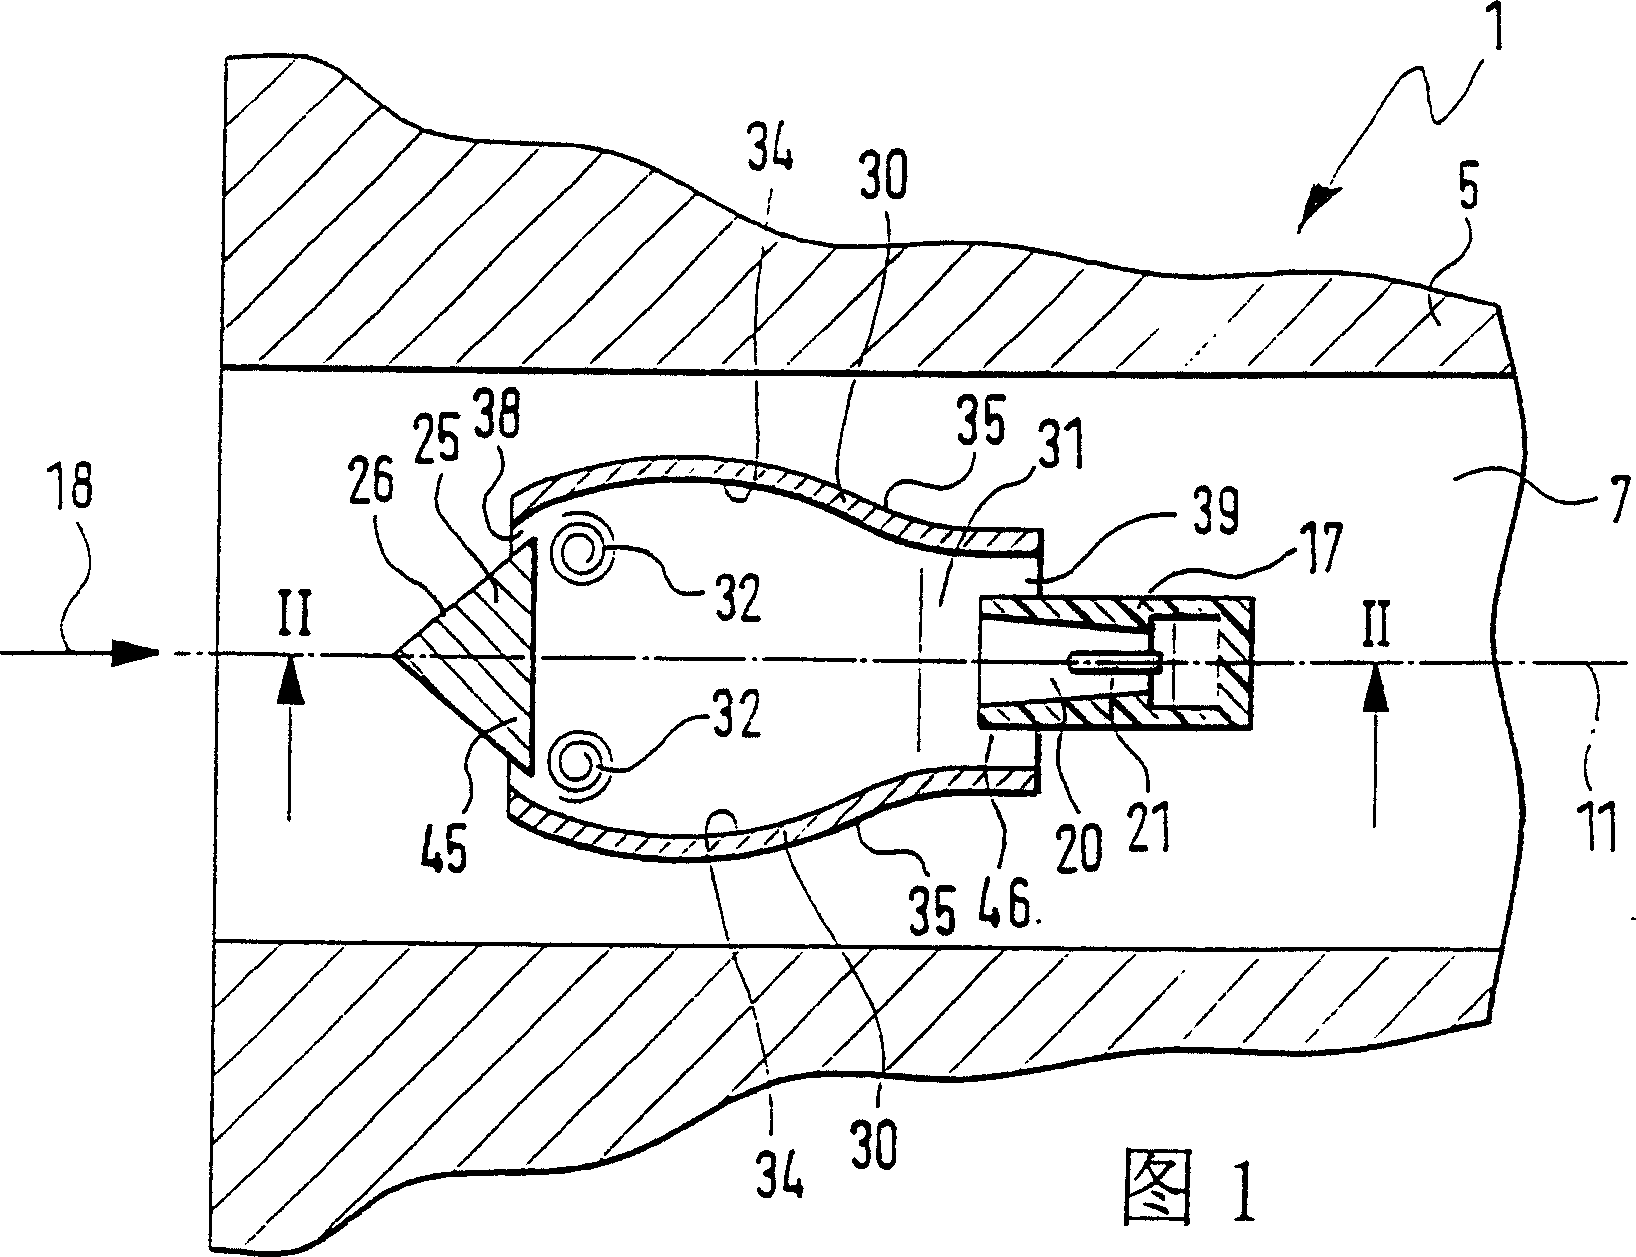 Device for measuring at least one parameter of flowing medium